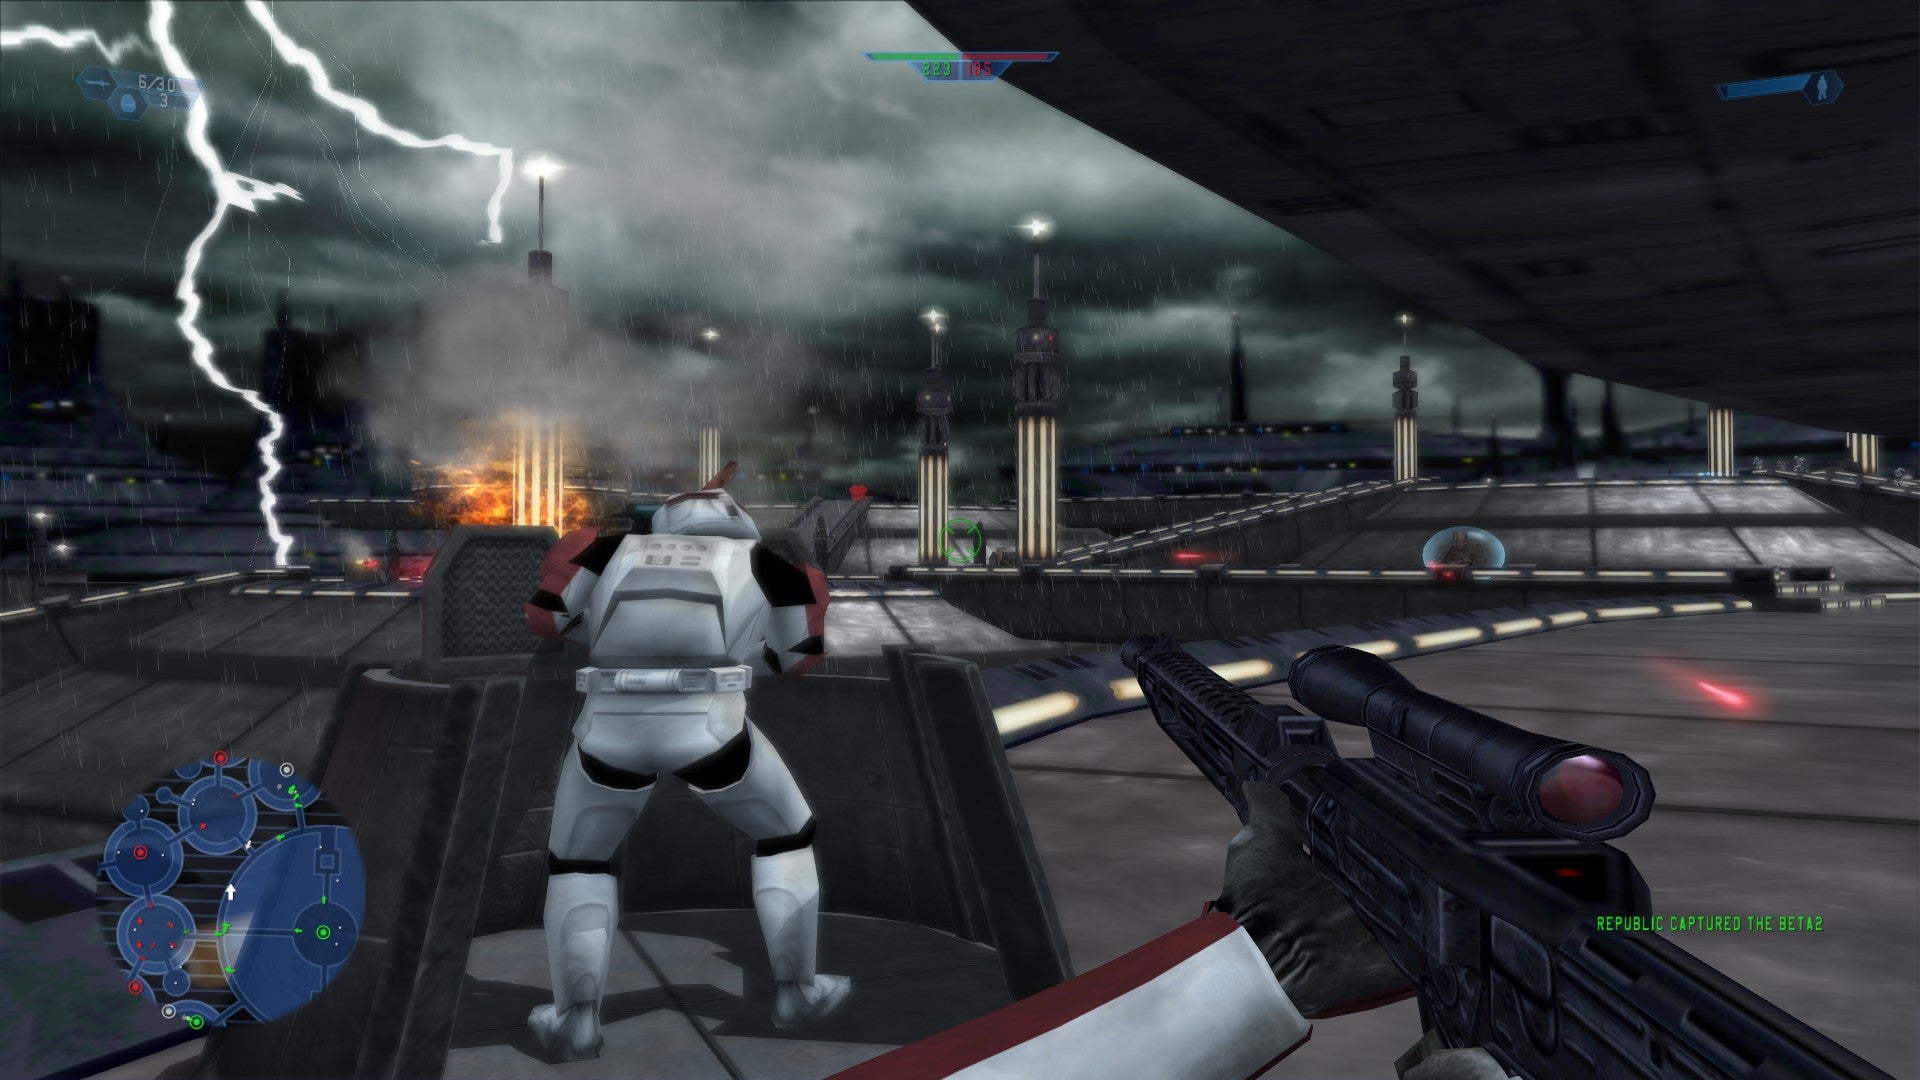 The player stands behind a stormtrooper in a stormy battle scene in Star Wars: Battlefront 2004